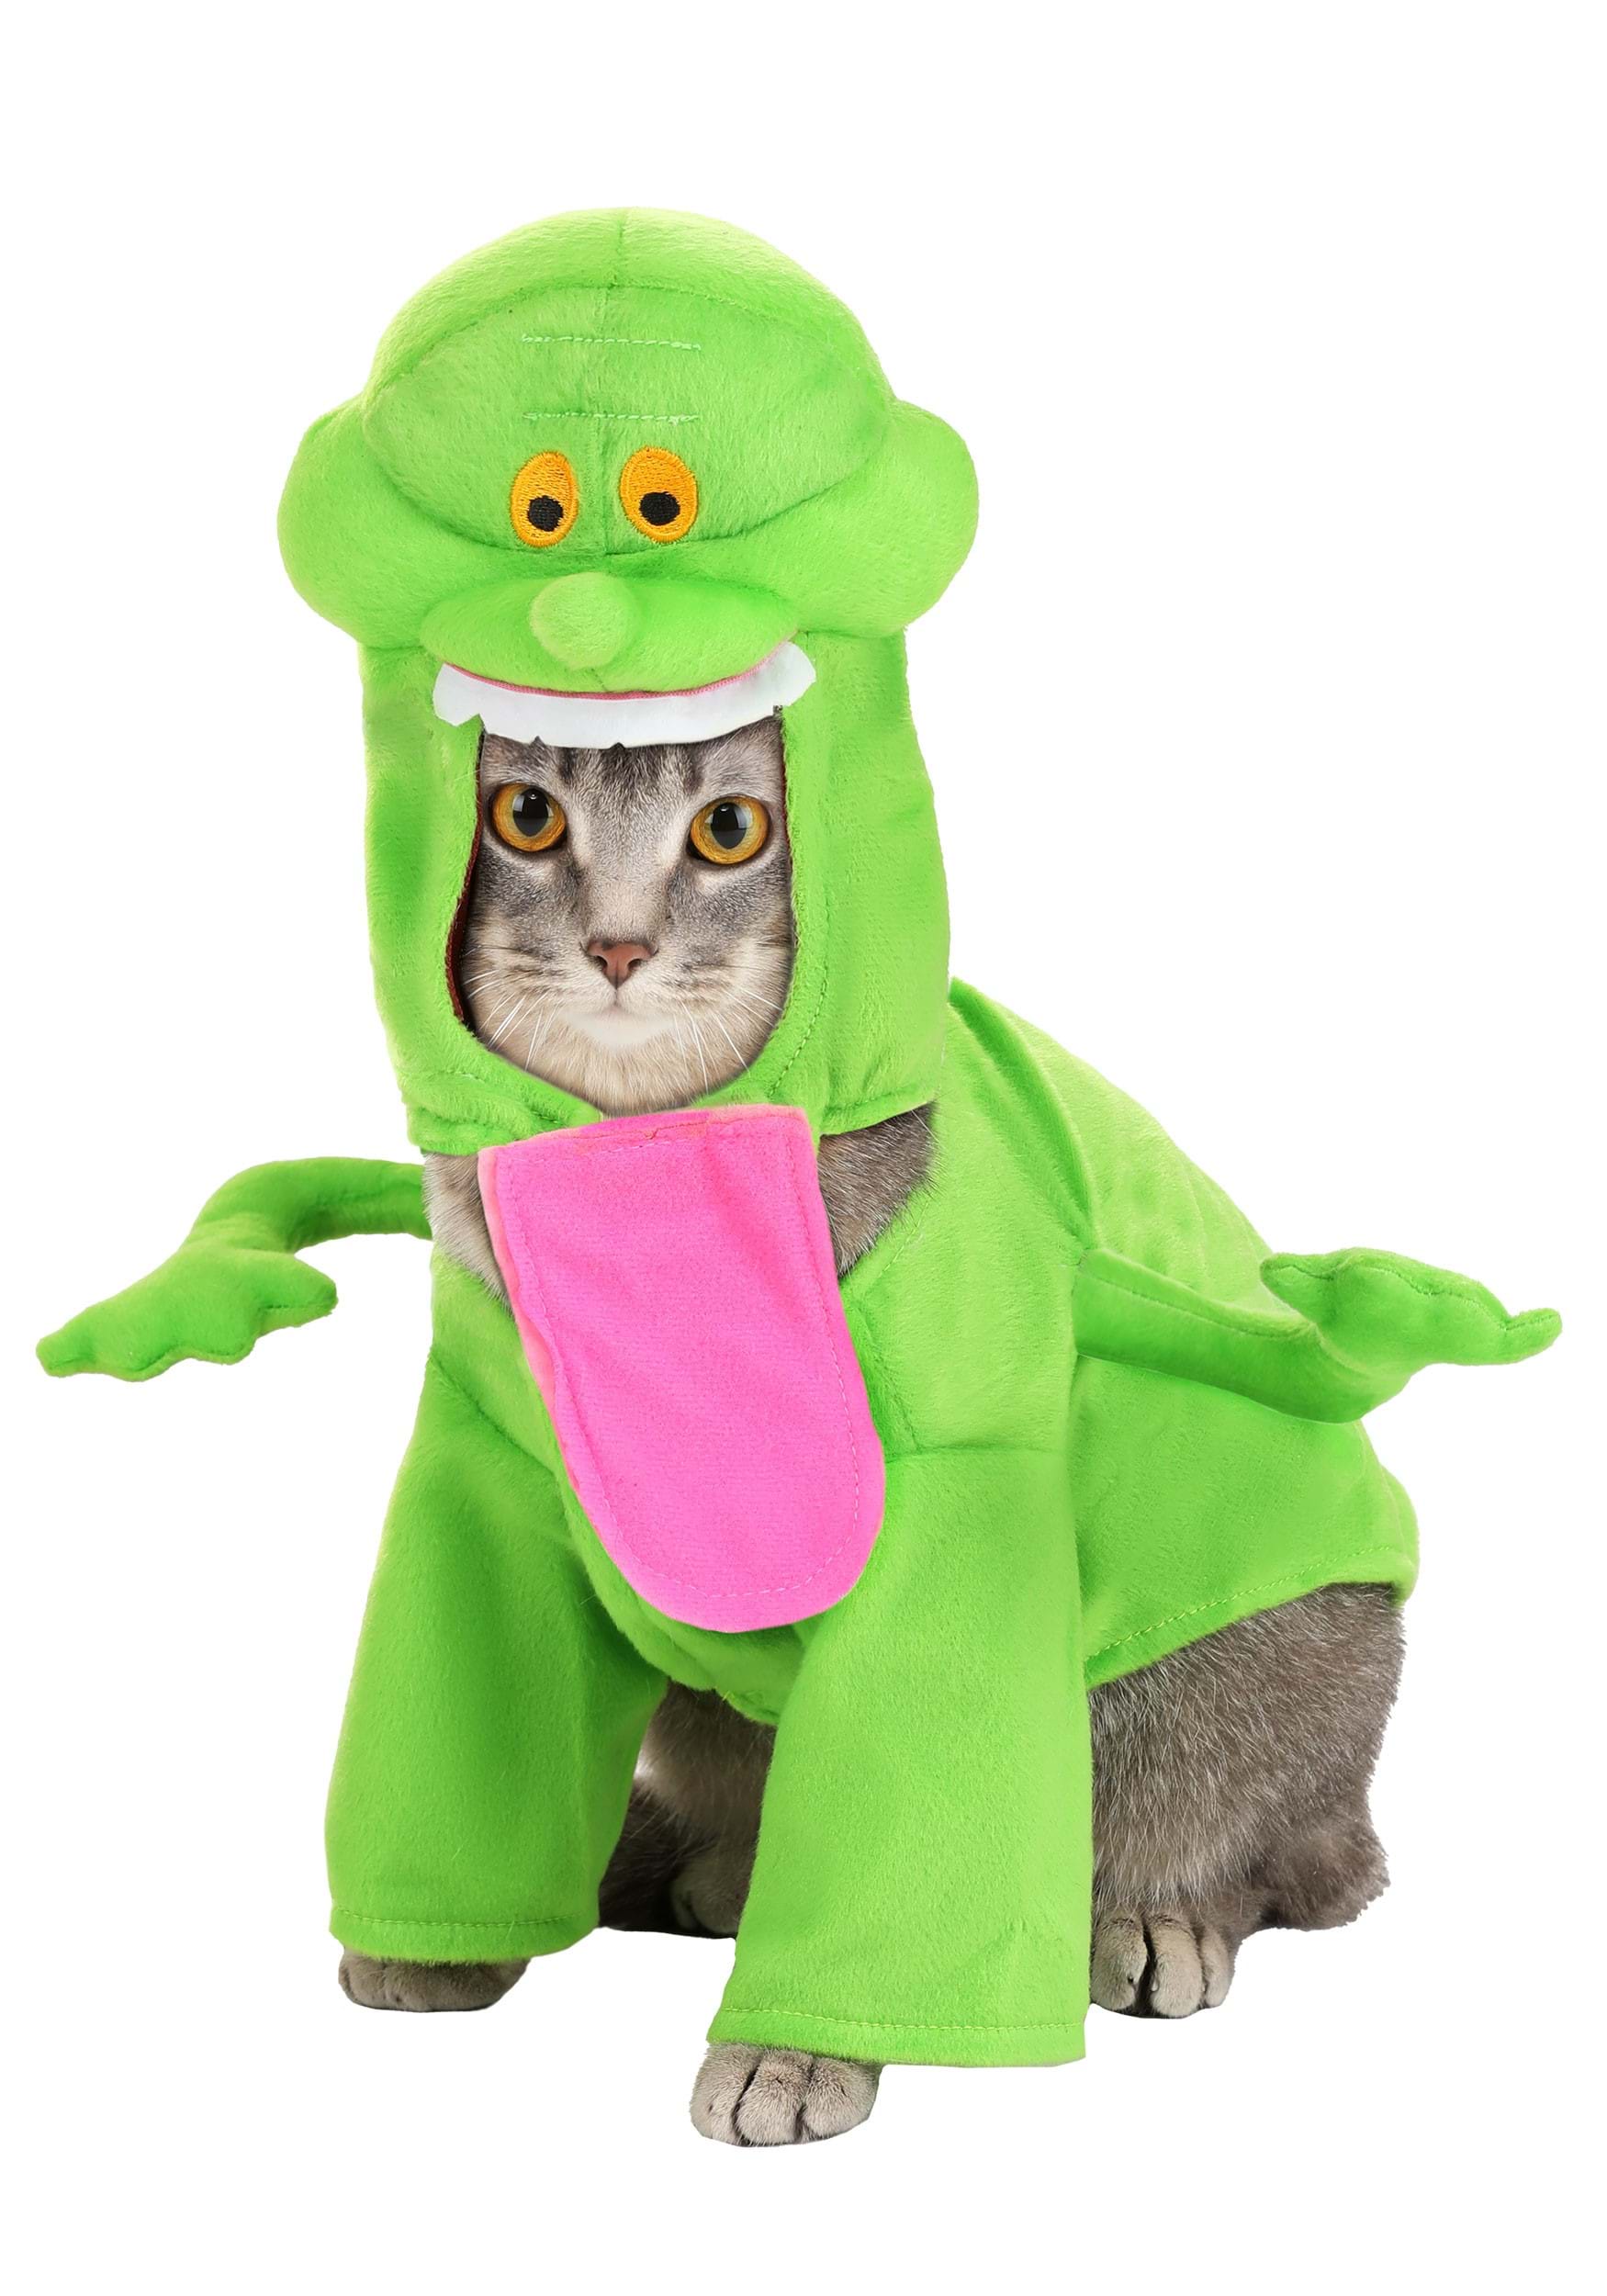 Ghostbusters Slimer Costume For Pets